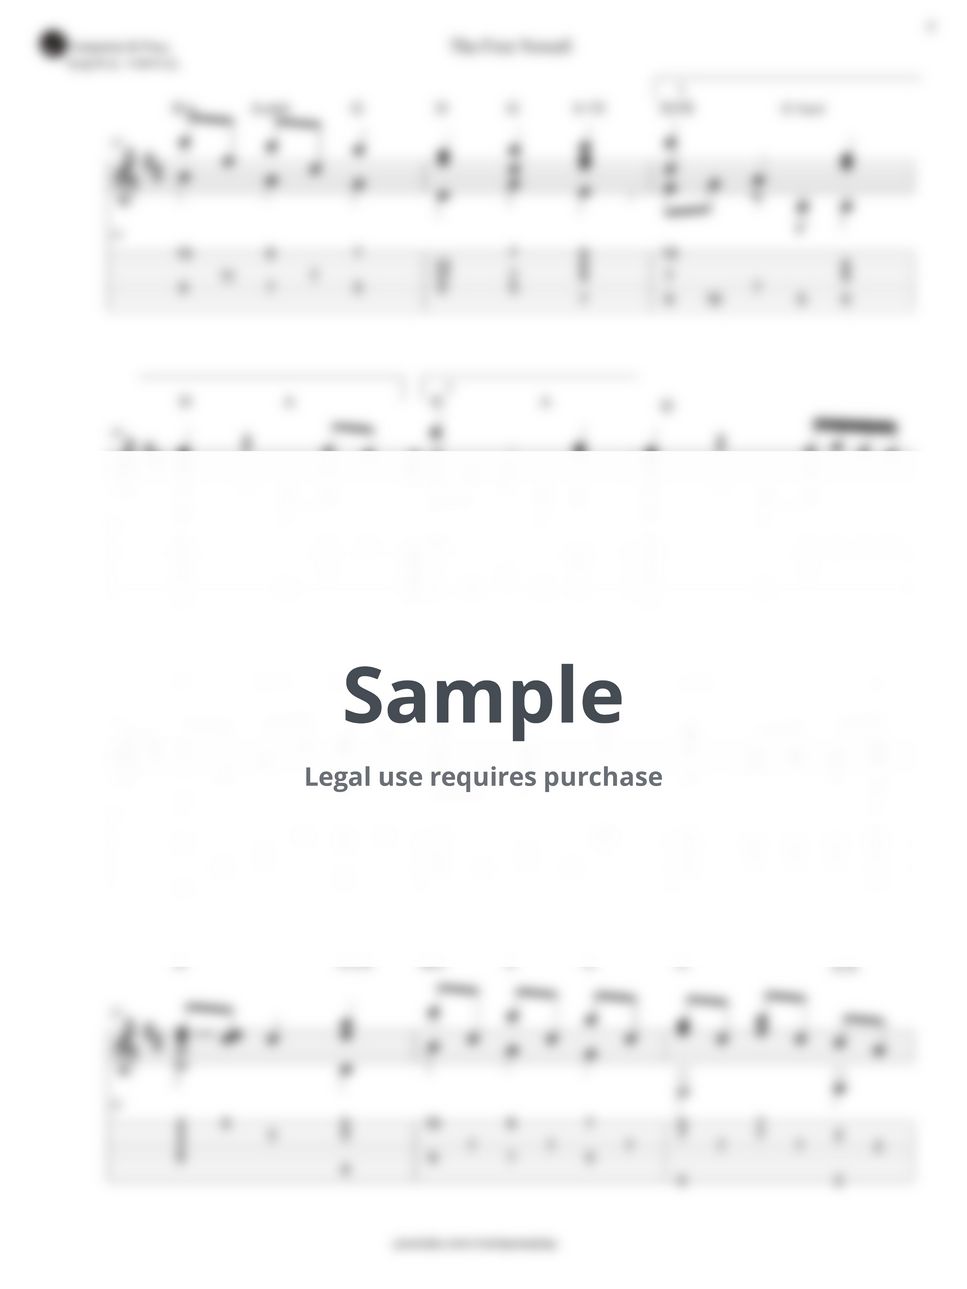 hymn - The First Nowell by compose & play